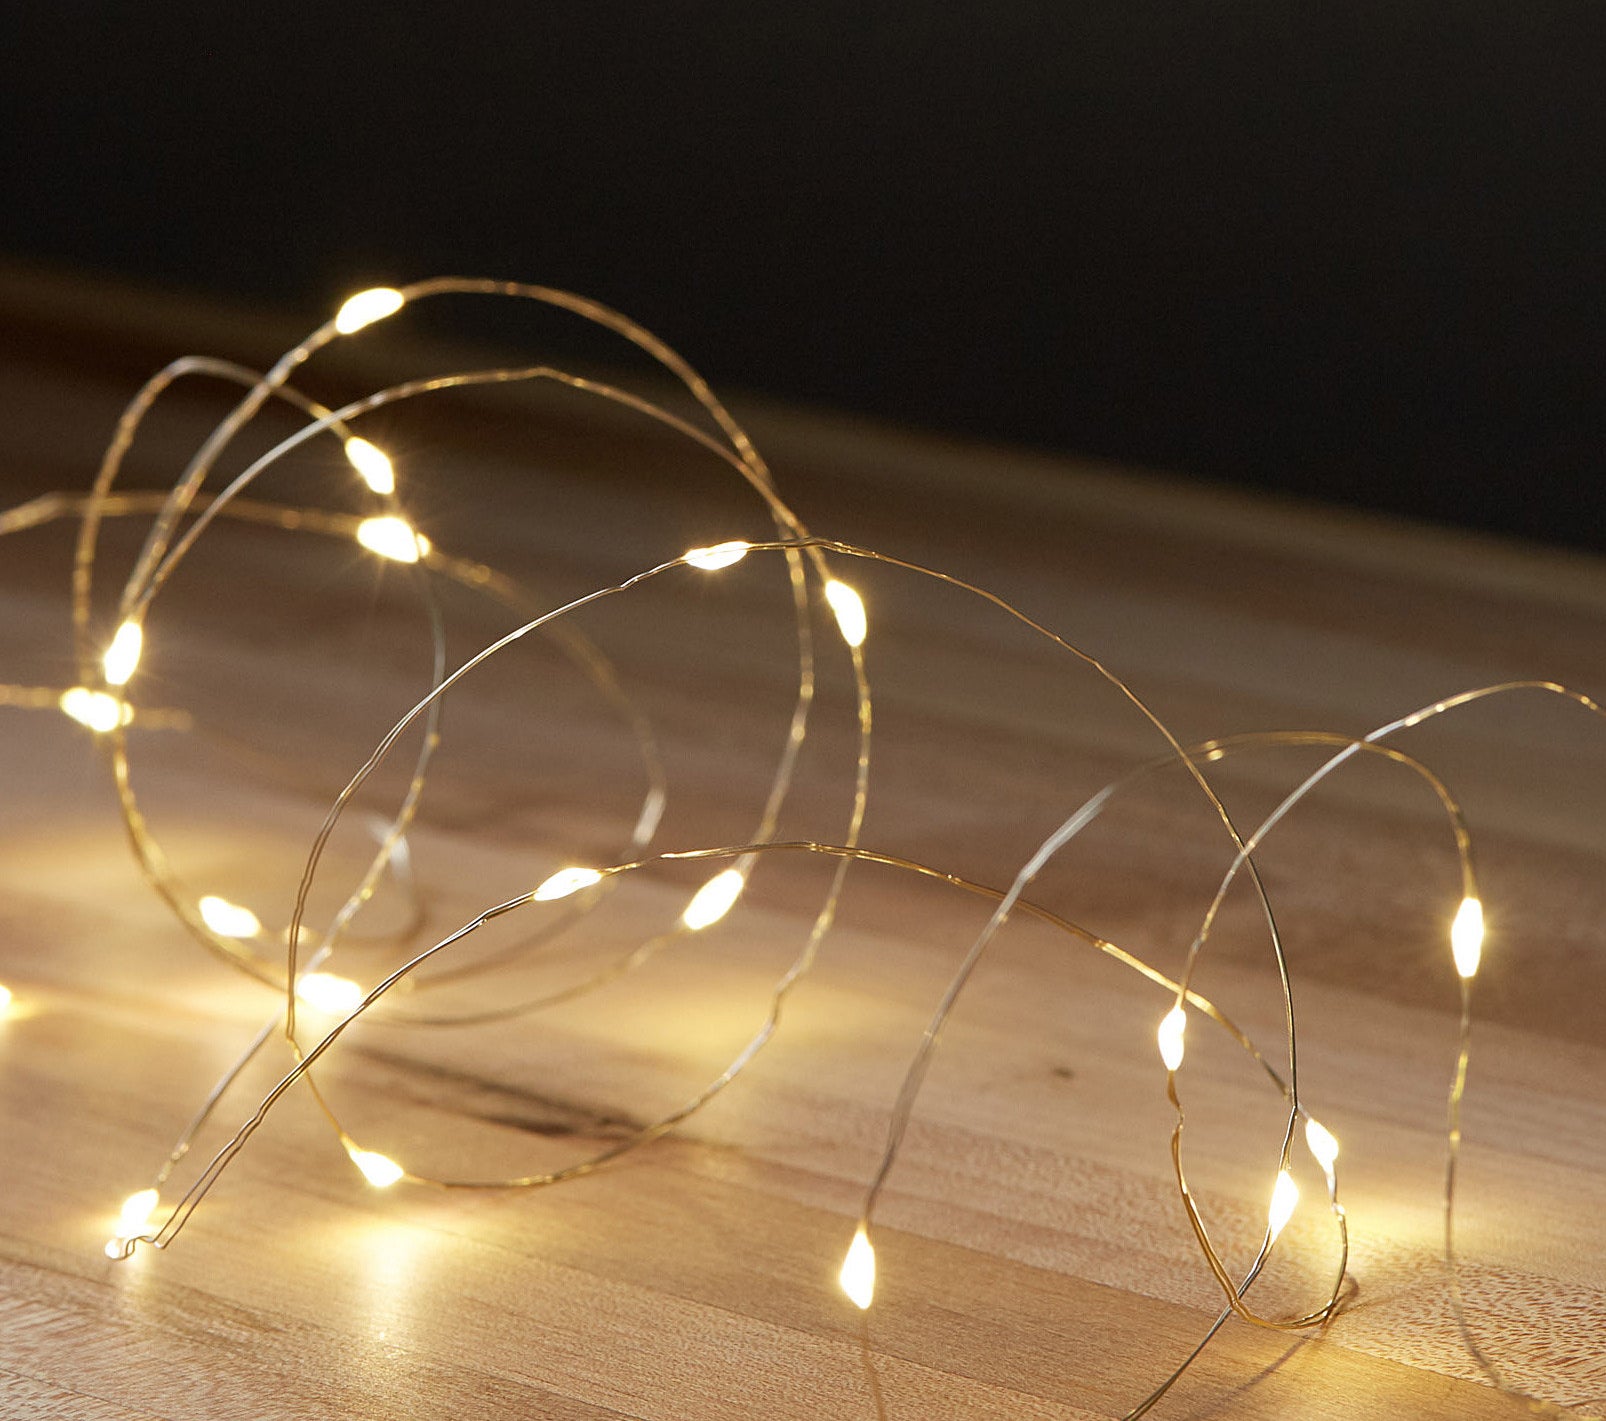 A string of fairy lights on a wooden floor